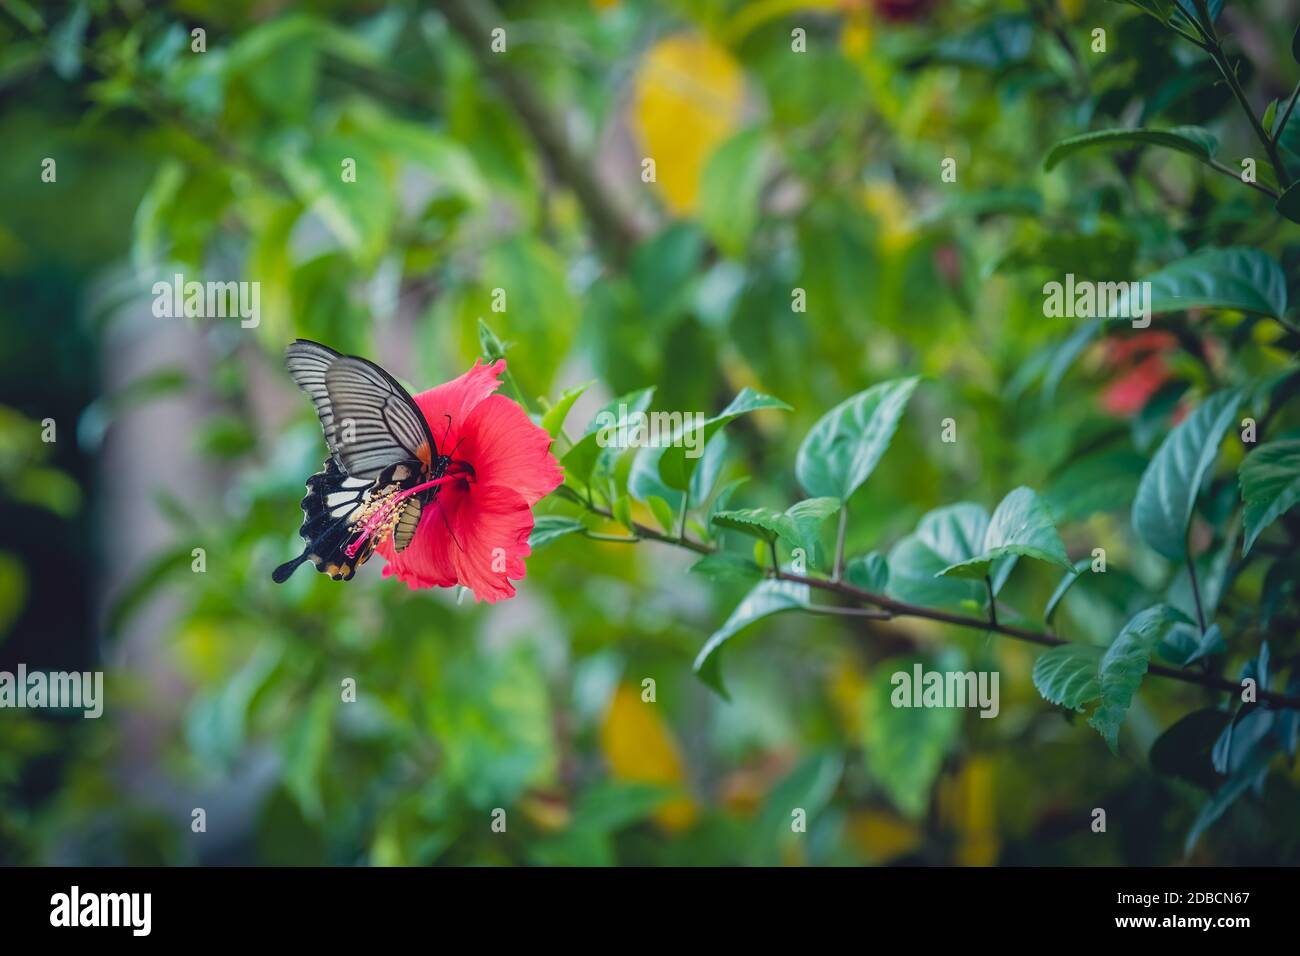 A beautiful shot of a butterfly on a red flower surrounded by plants in the garden Stock Photo